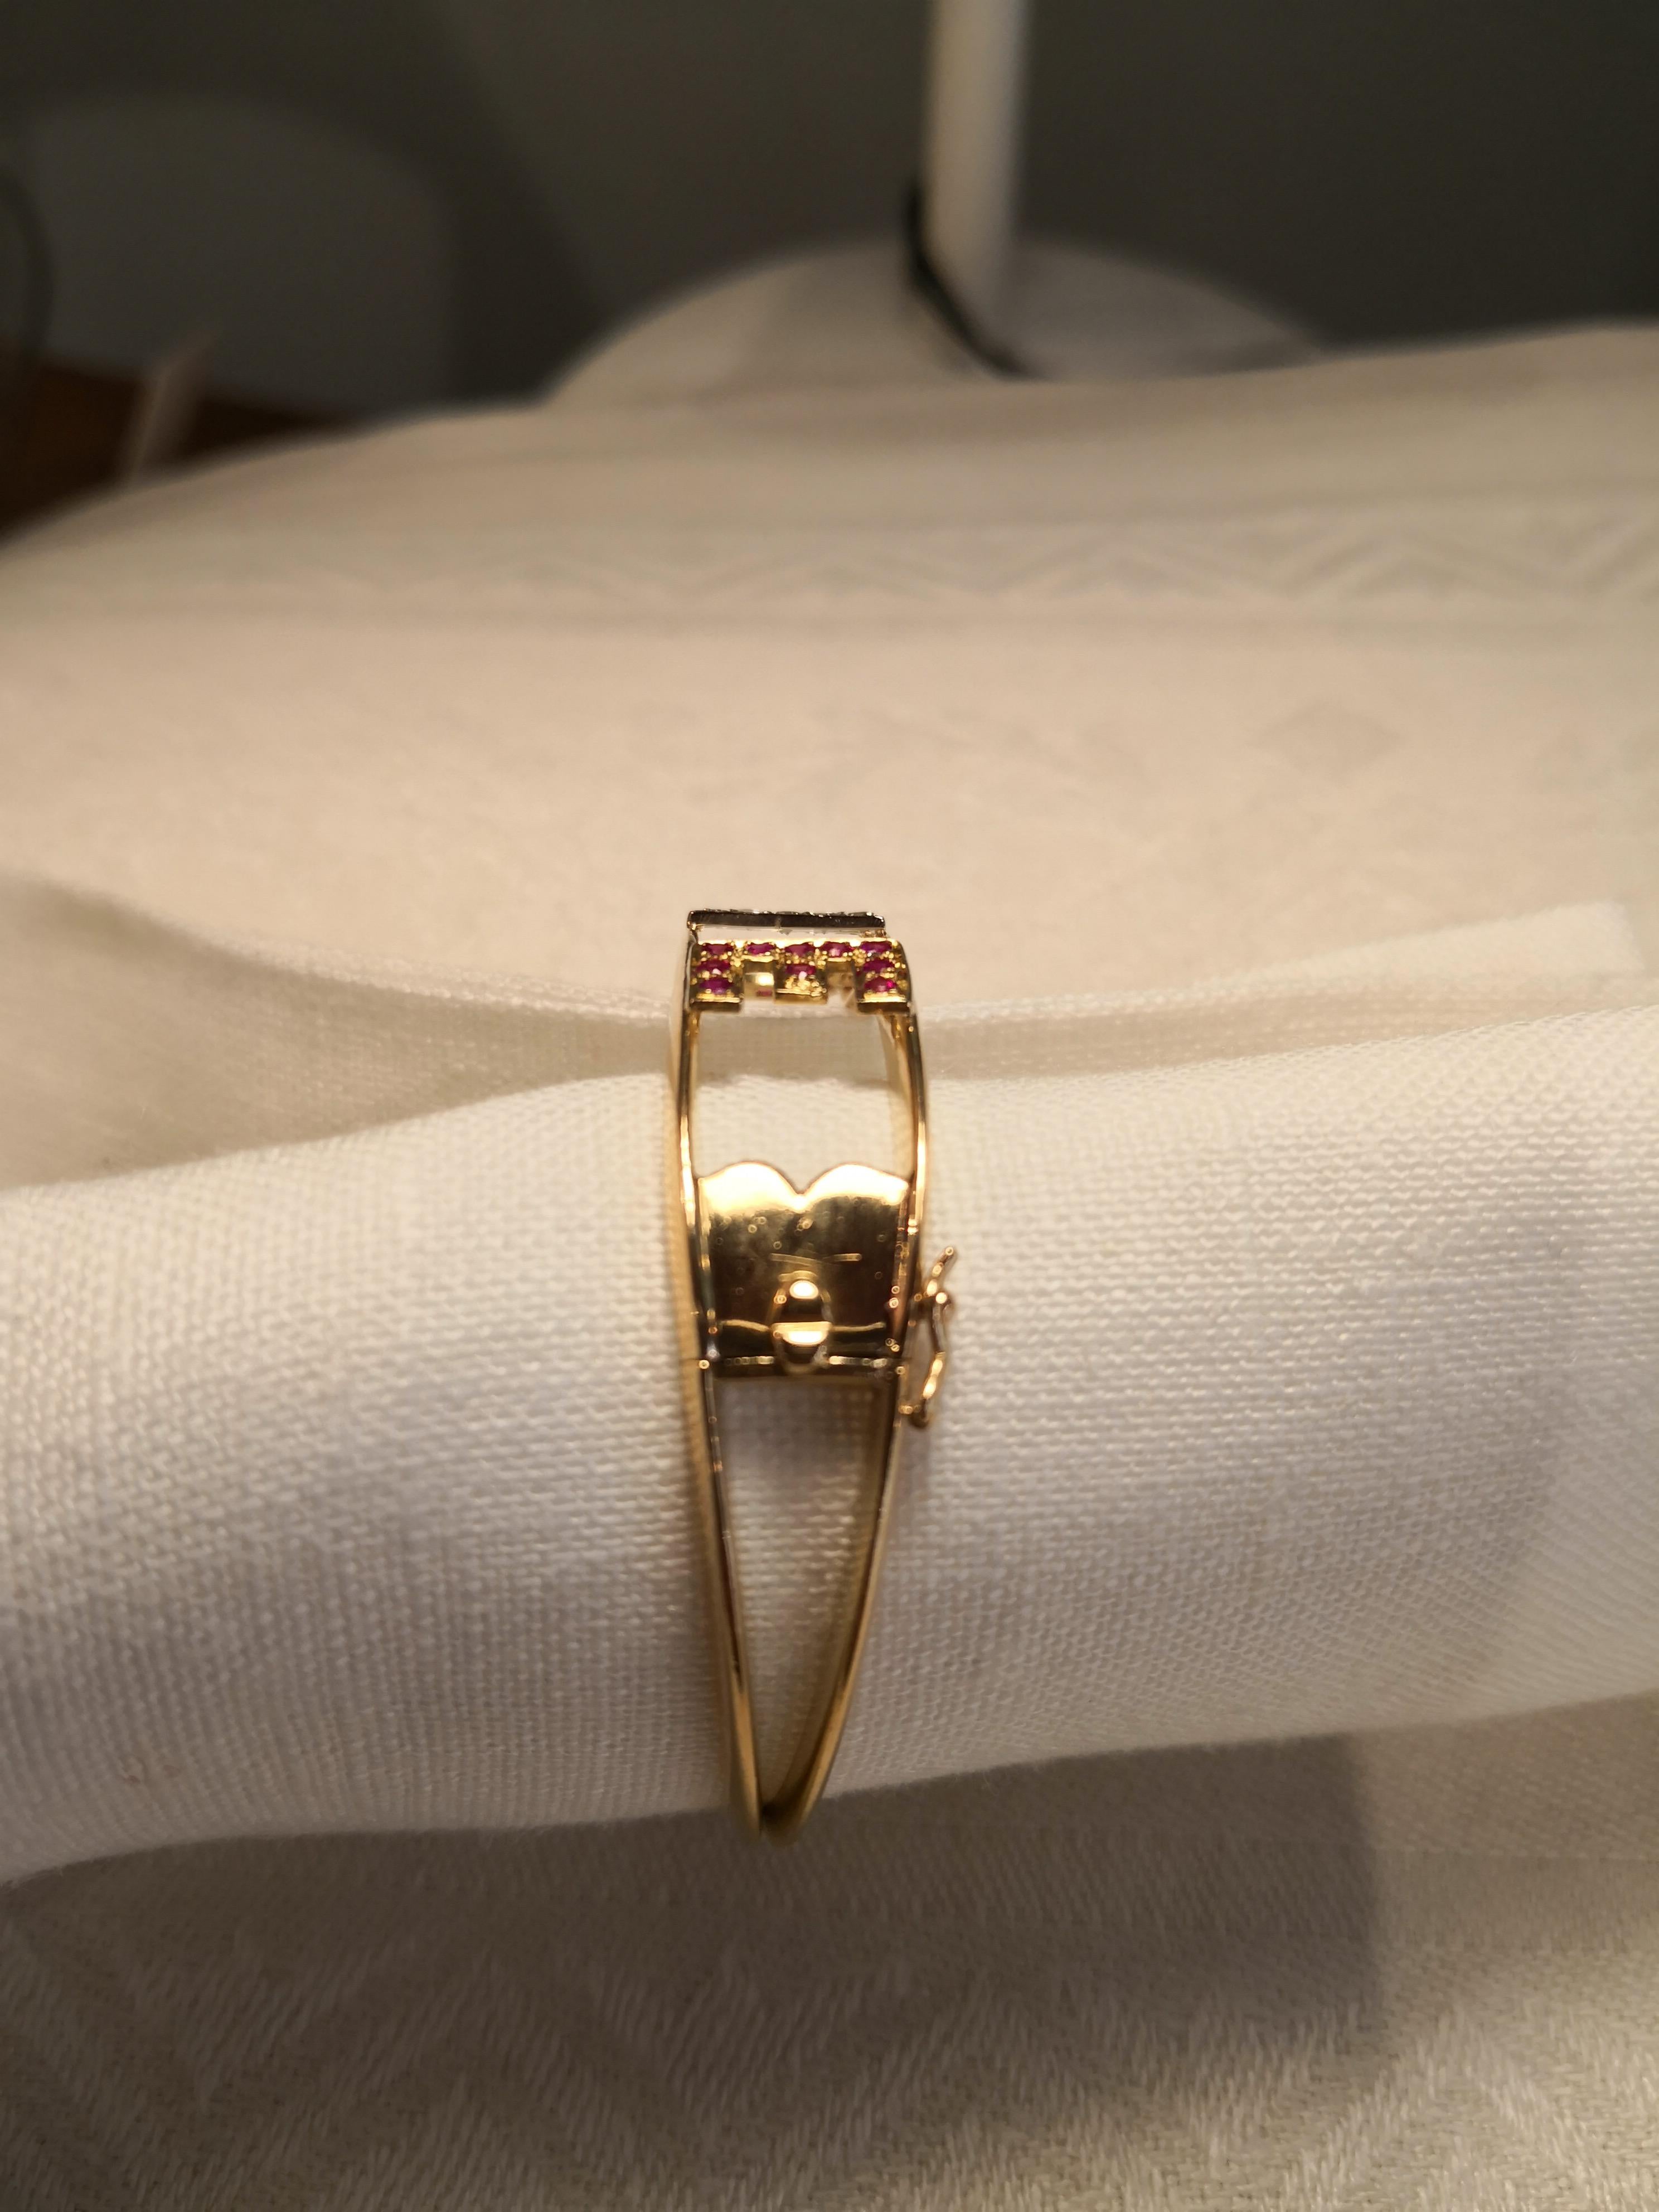 Mid-Century Modern Midcentury Gold Bracelet Love with Diamonds and Rubis Handmade from Italy